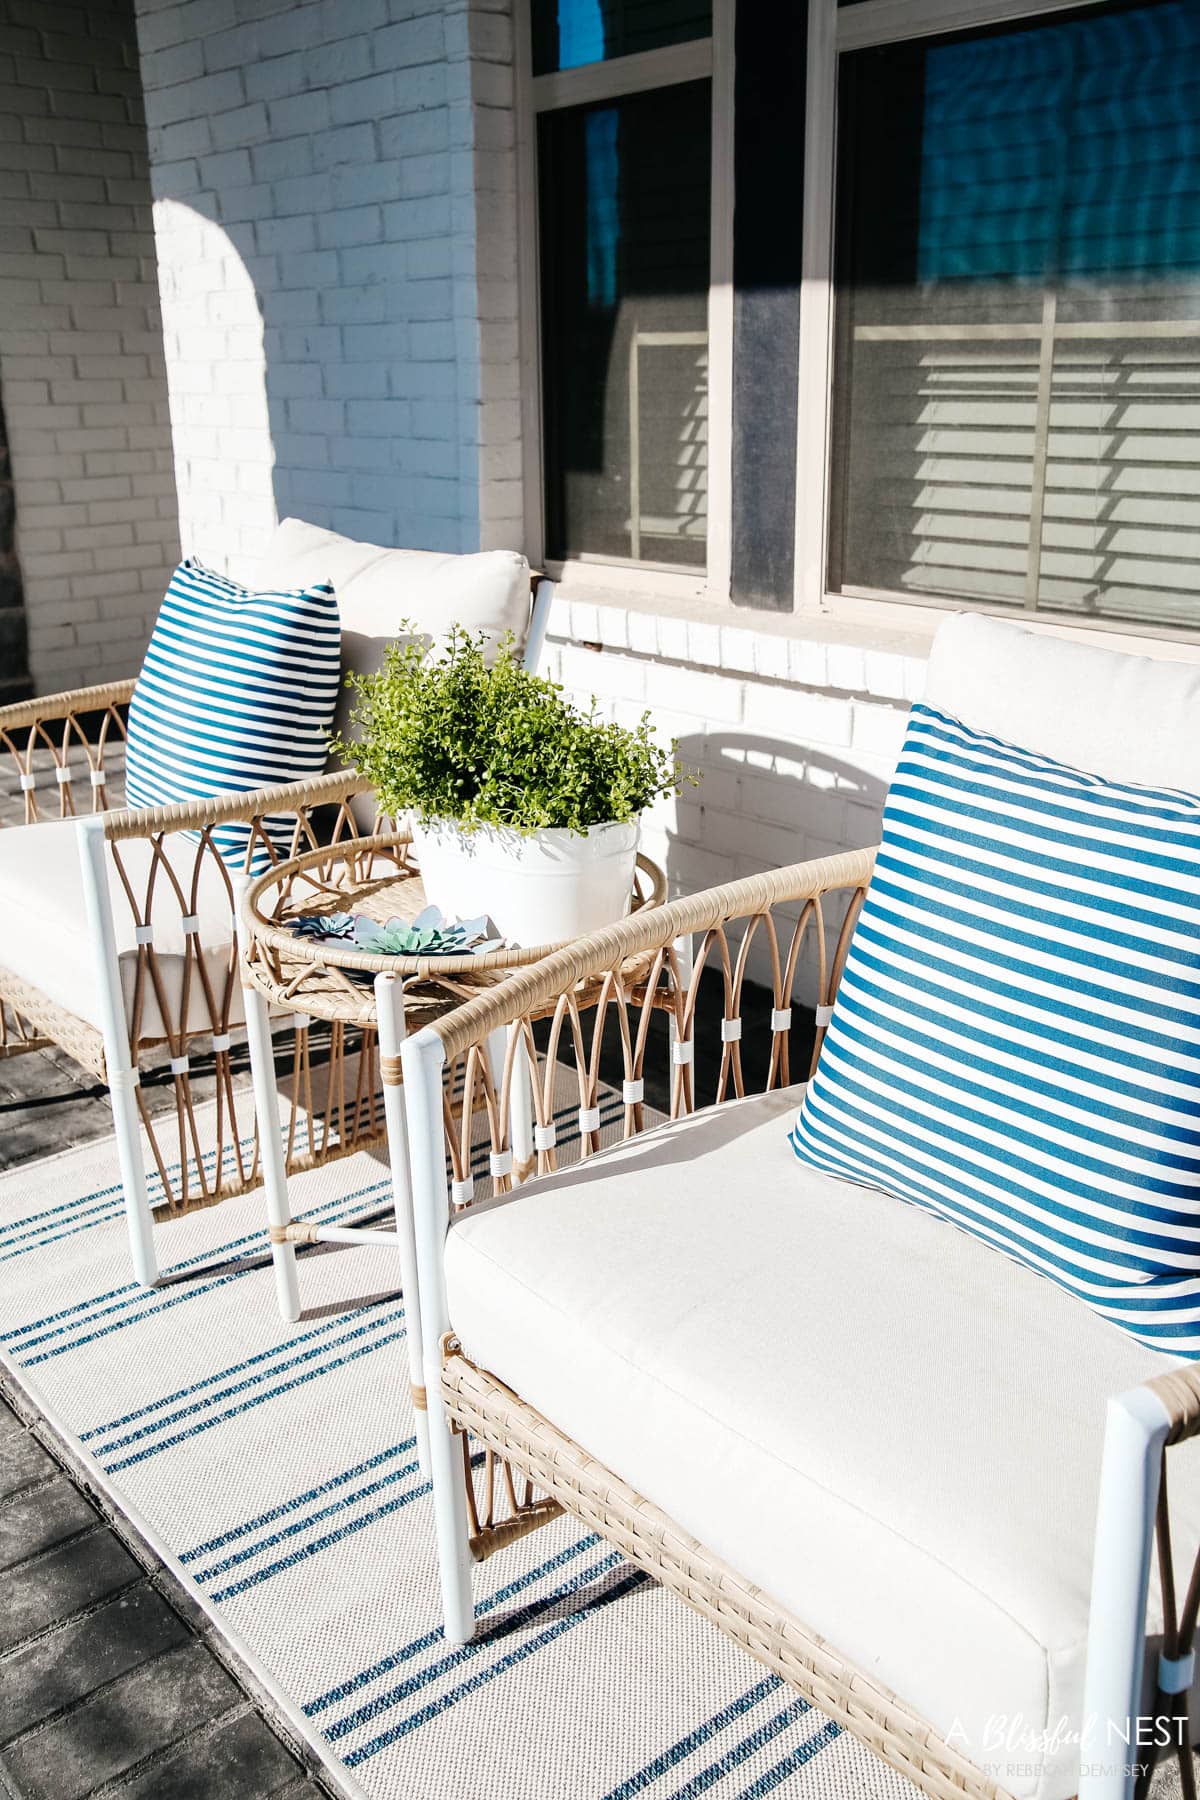 Navy and white striped outdoor pillows on side porch chairs